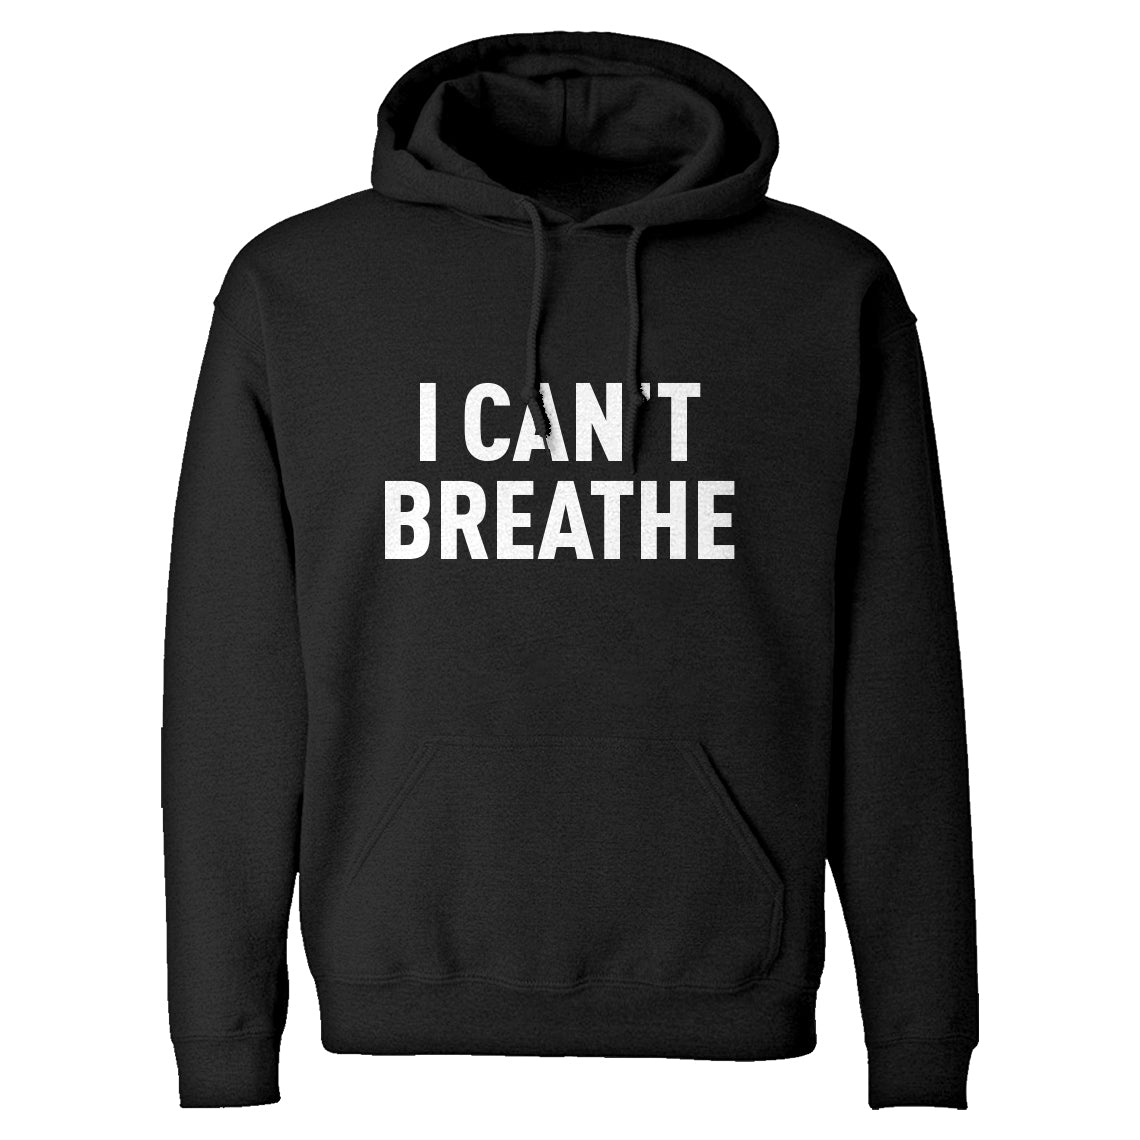 I Can't Breathe Unisex Adult Hoodie